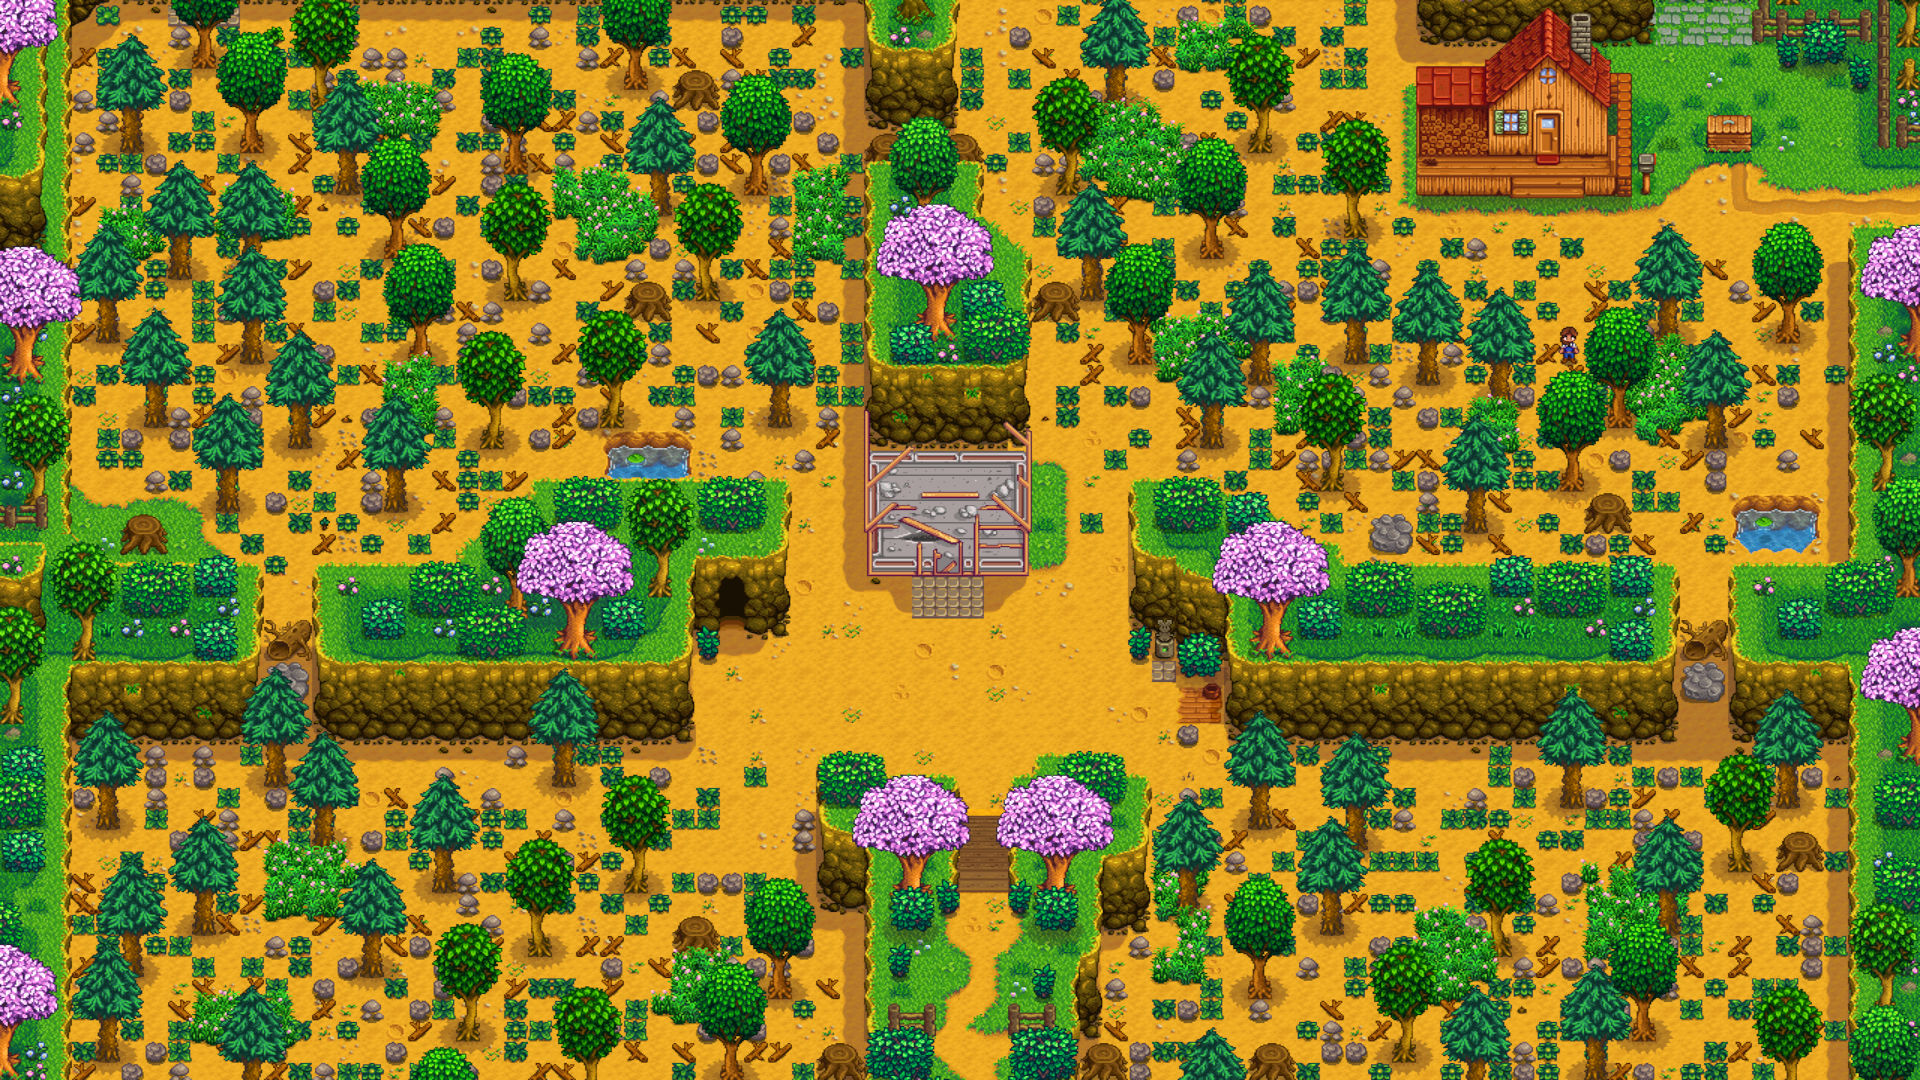 A shot of the Stardew Valley four corners map